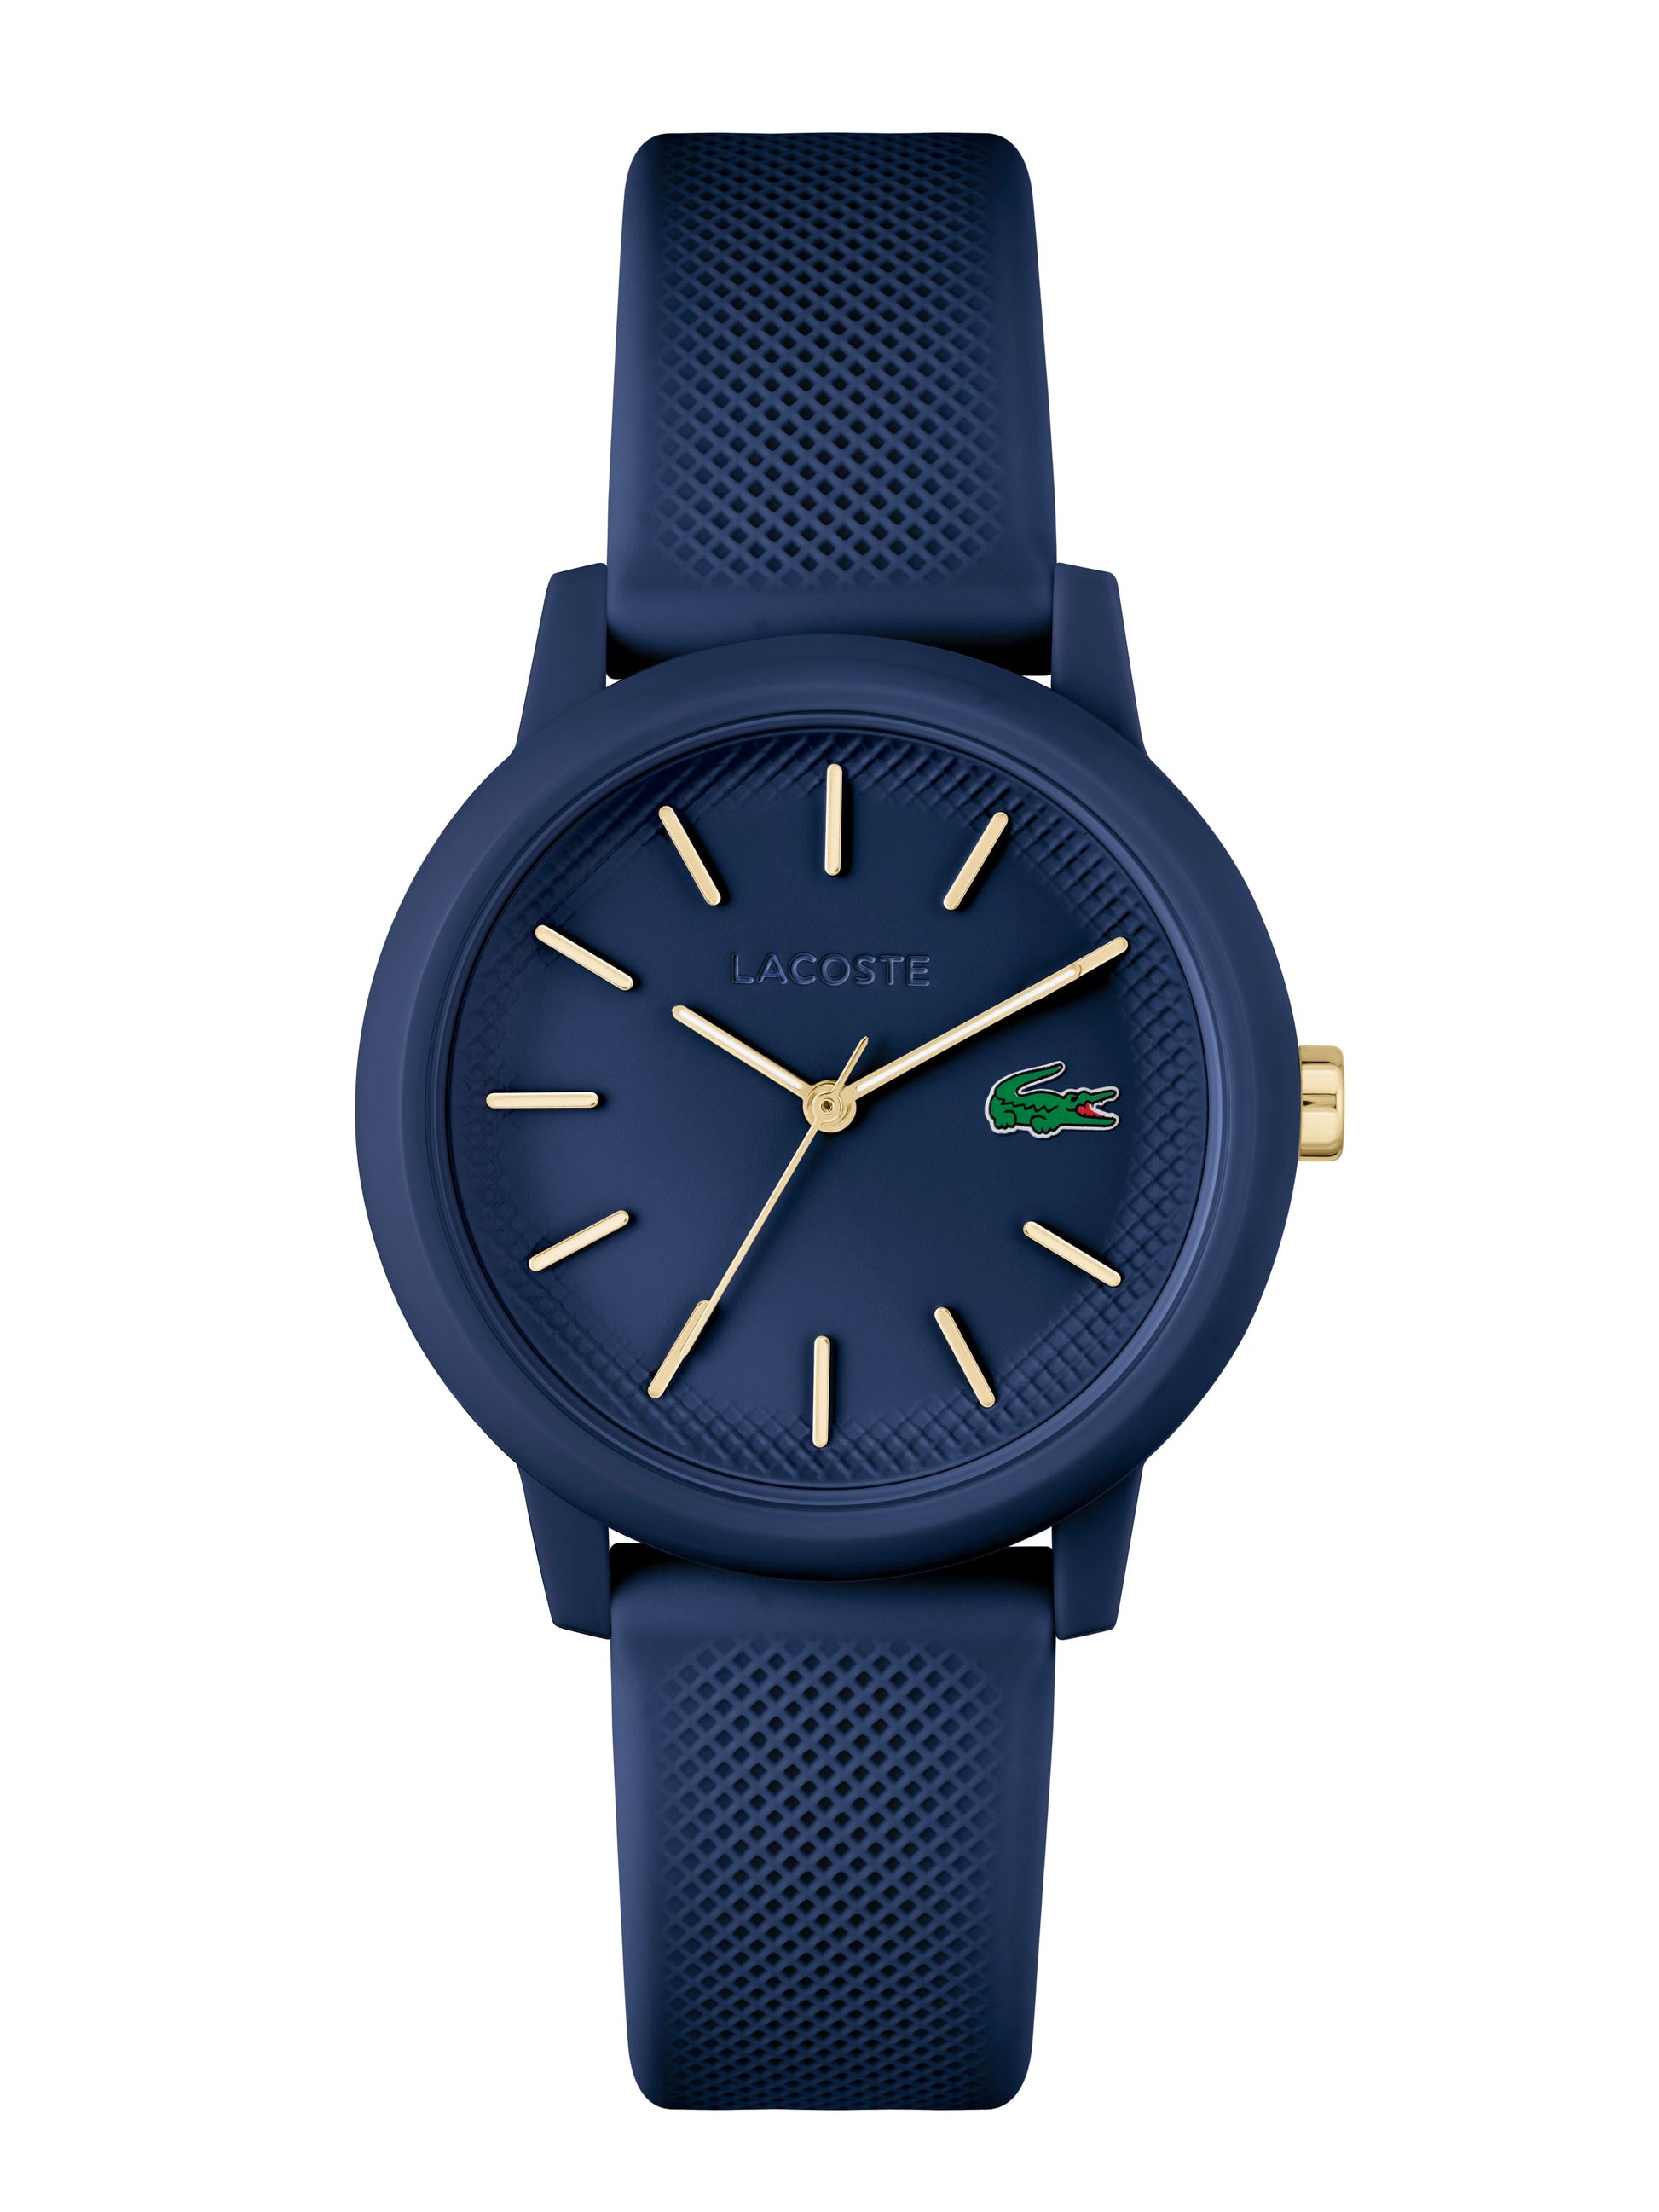 The Ladies Lacoste.12.12 Blue Watch 2001271 by Lacoste, available in blue, is waterproof.